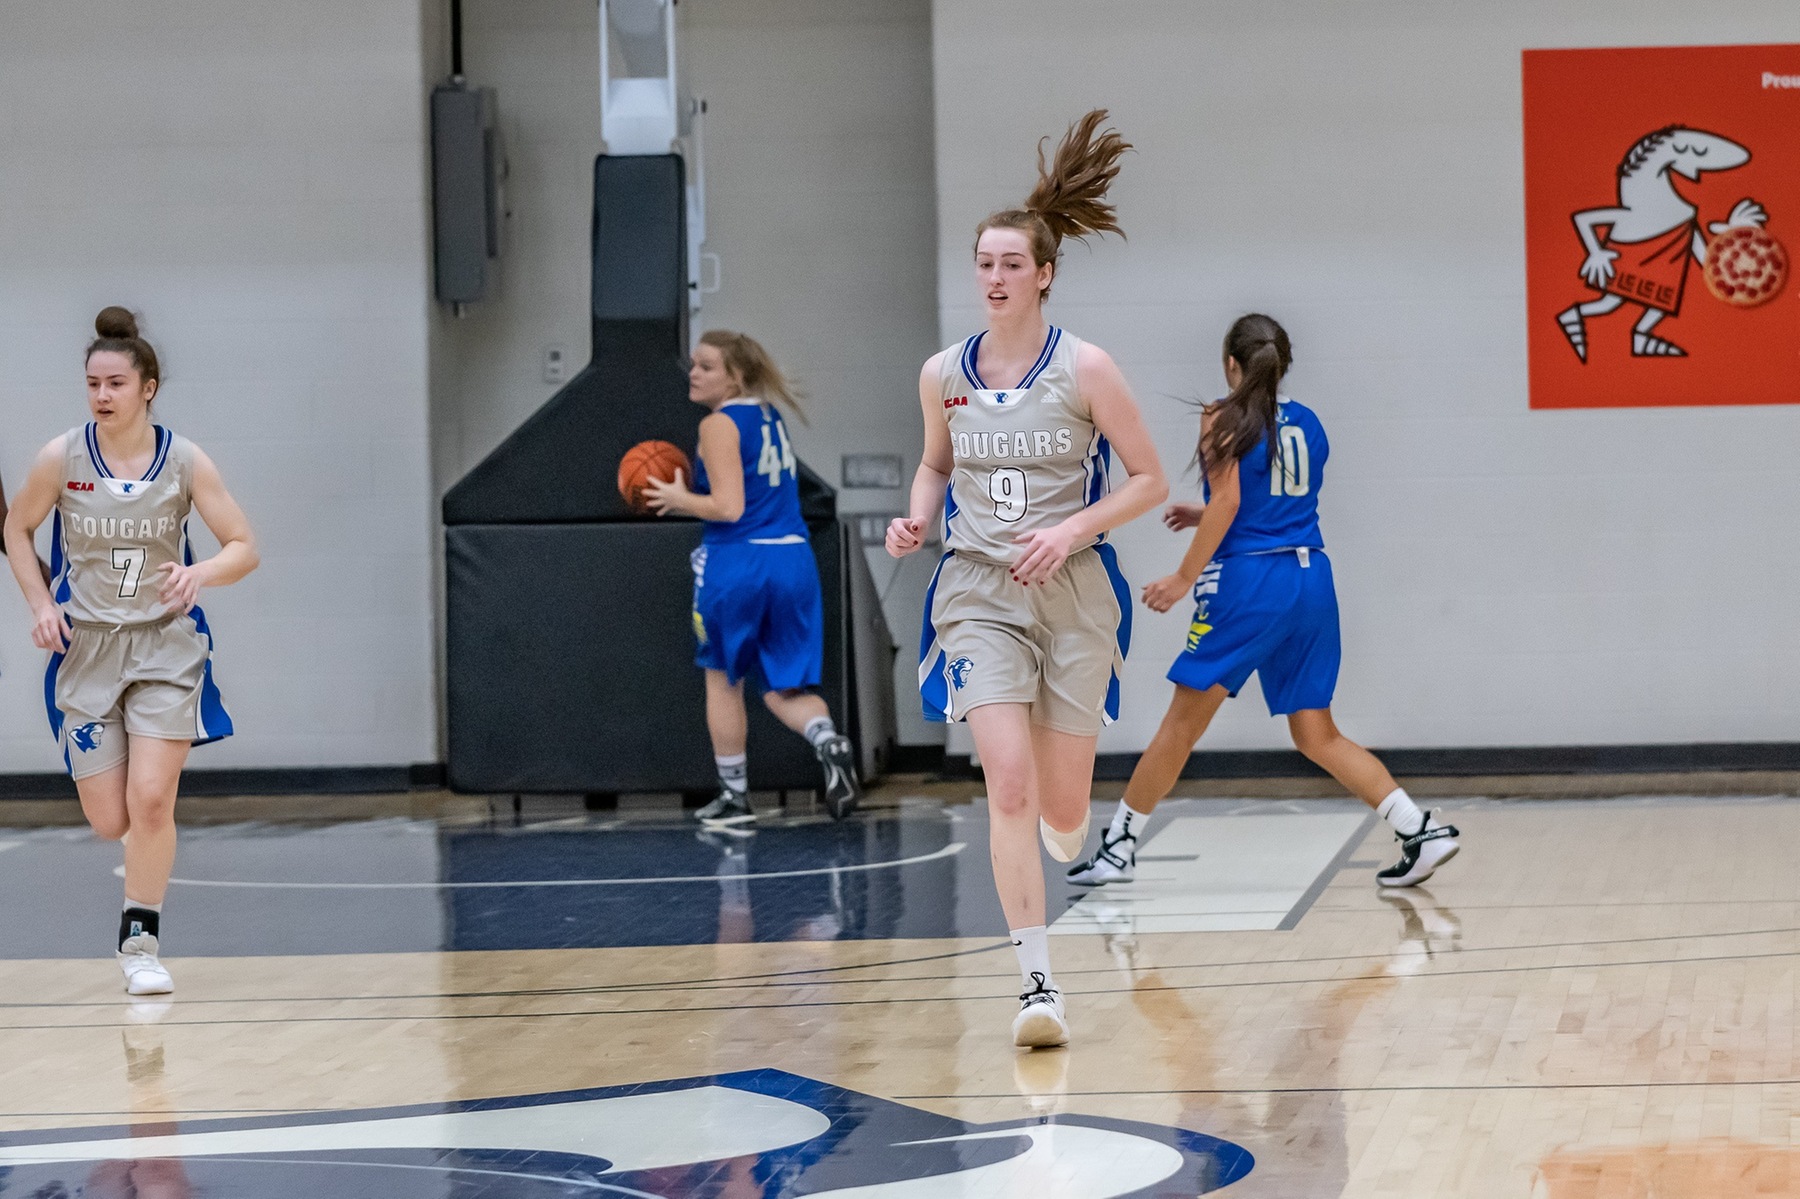 Women with convincing win over LSSU JV Lakers